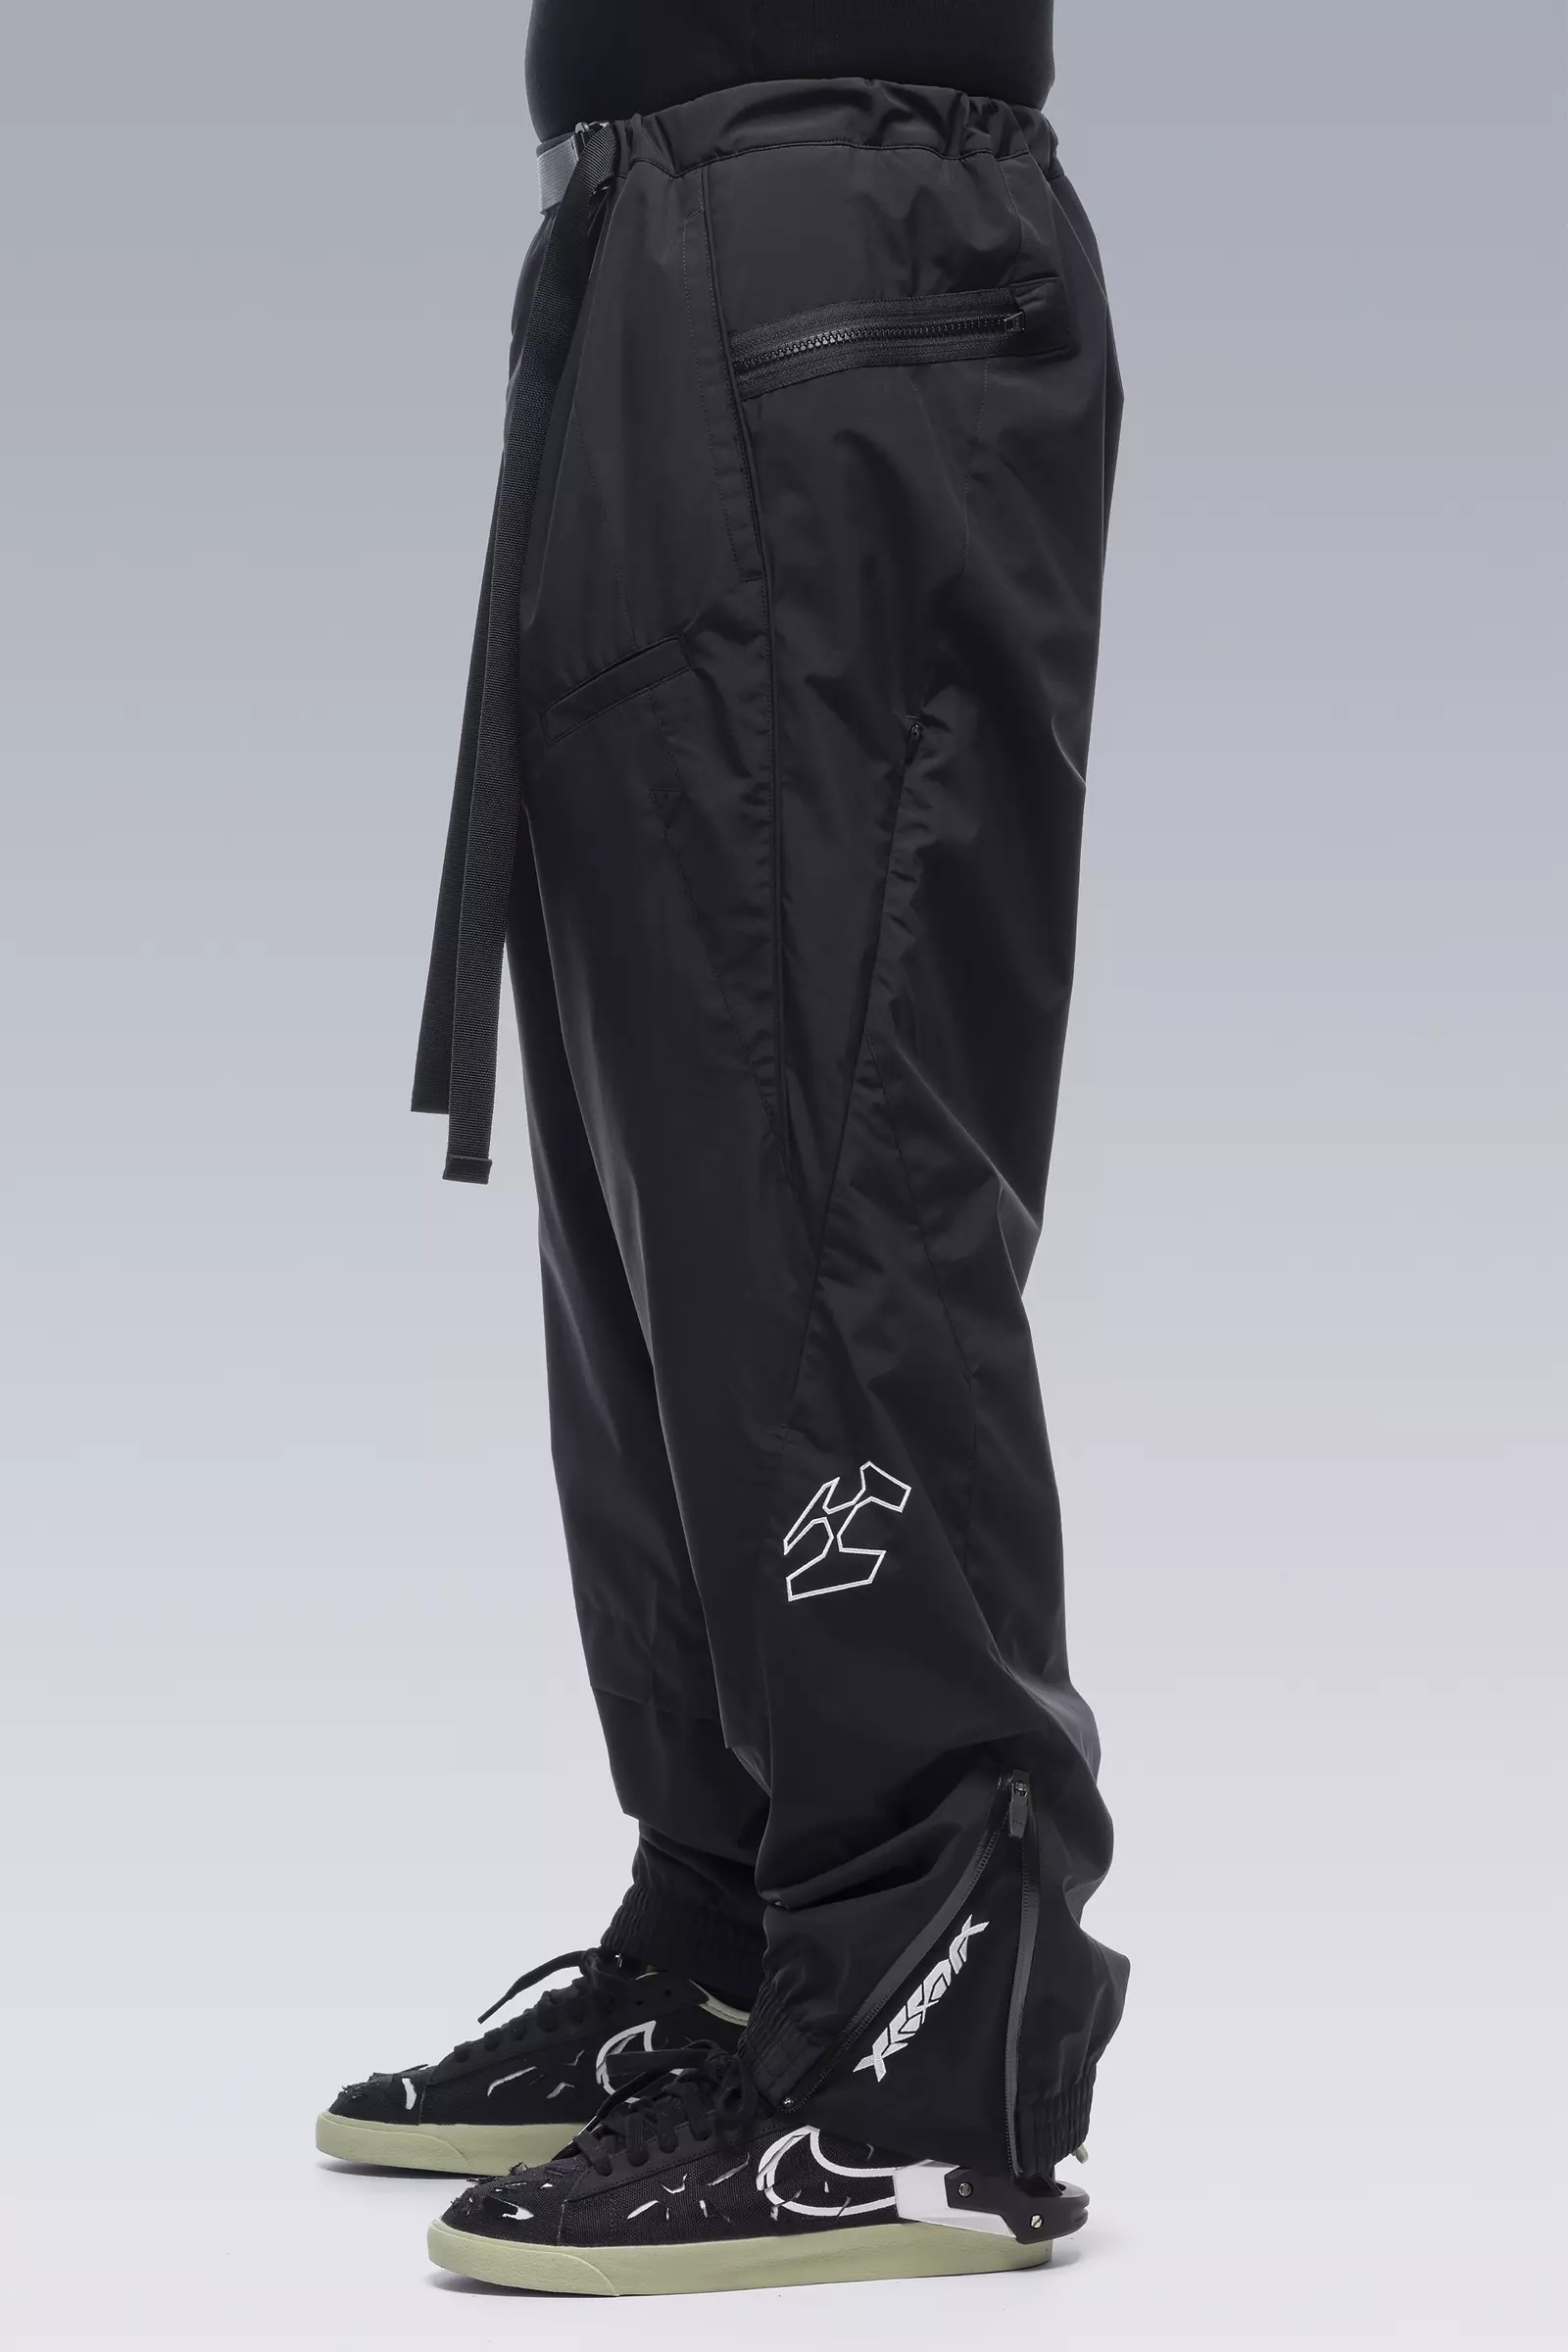 P53-WS 2L Gore-Tex® Windstopper® Insulated Vent Pants Black - 10